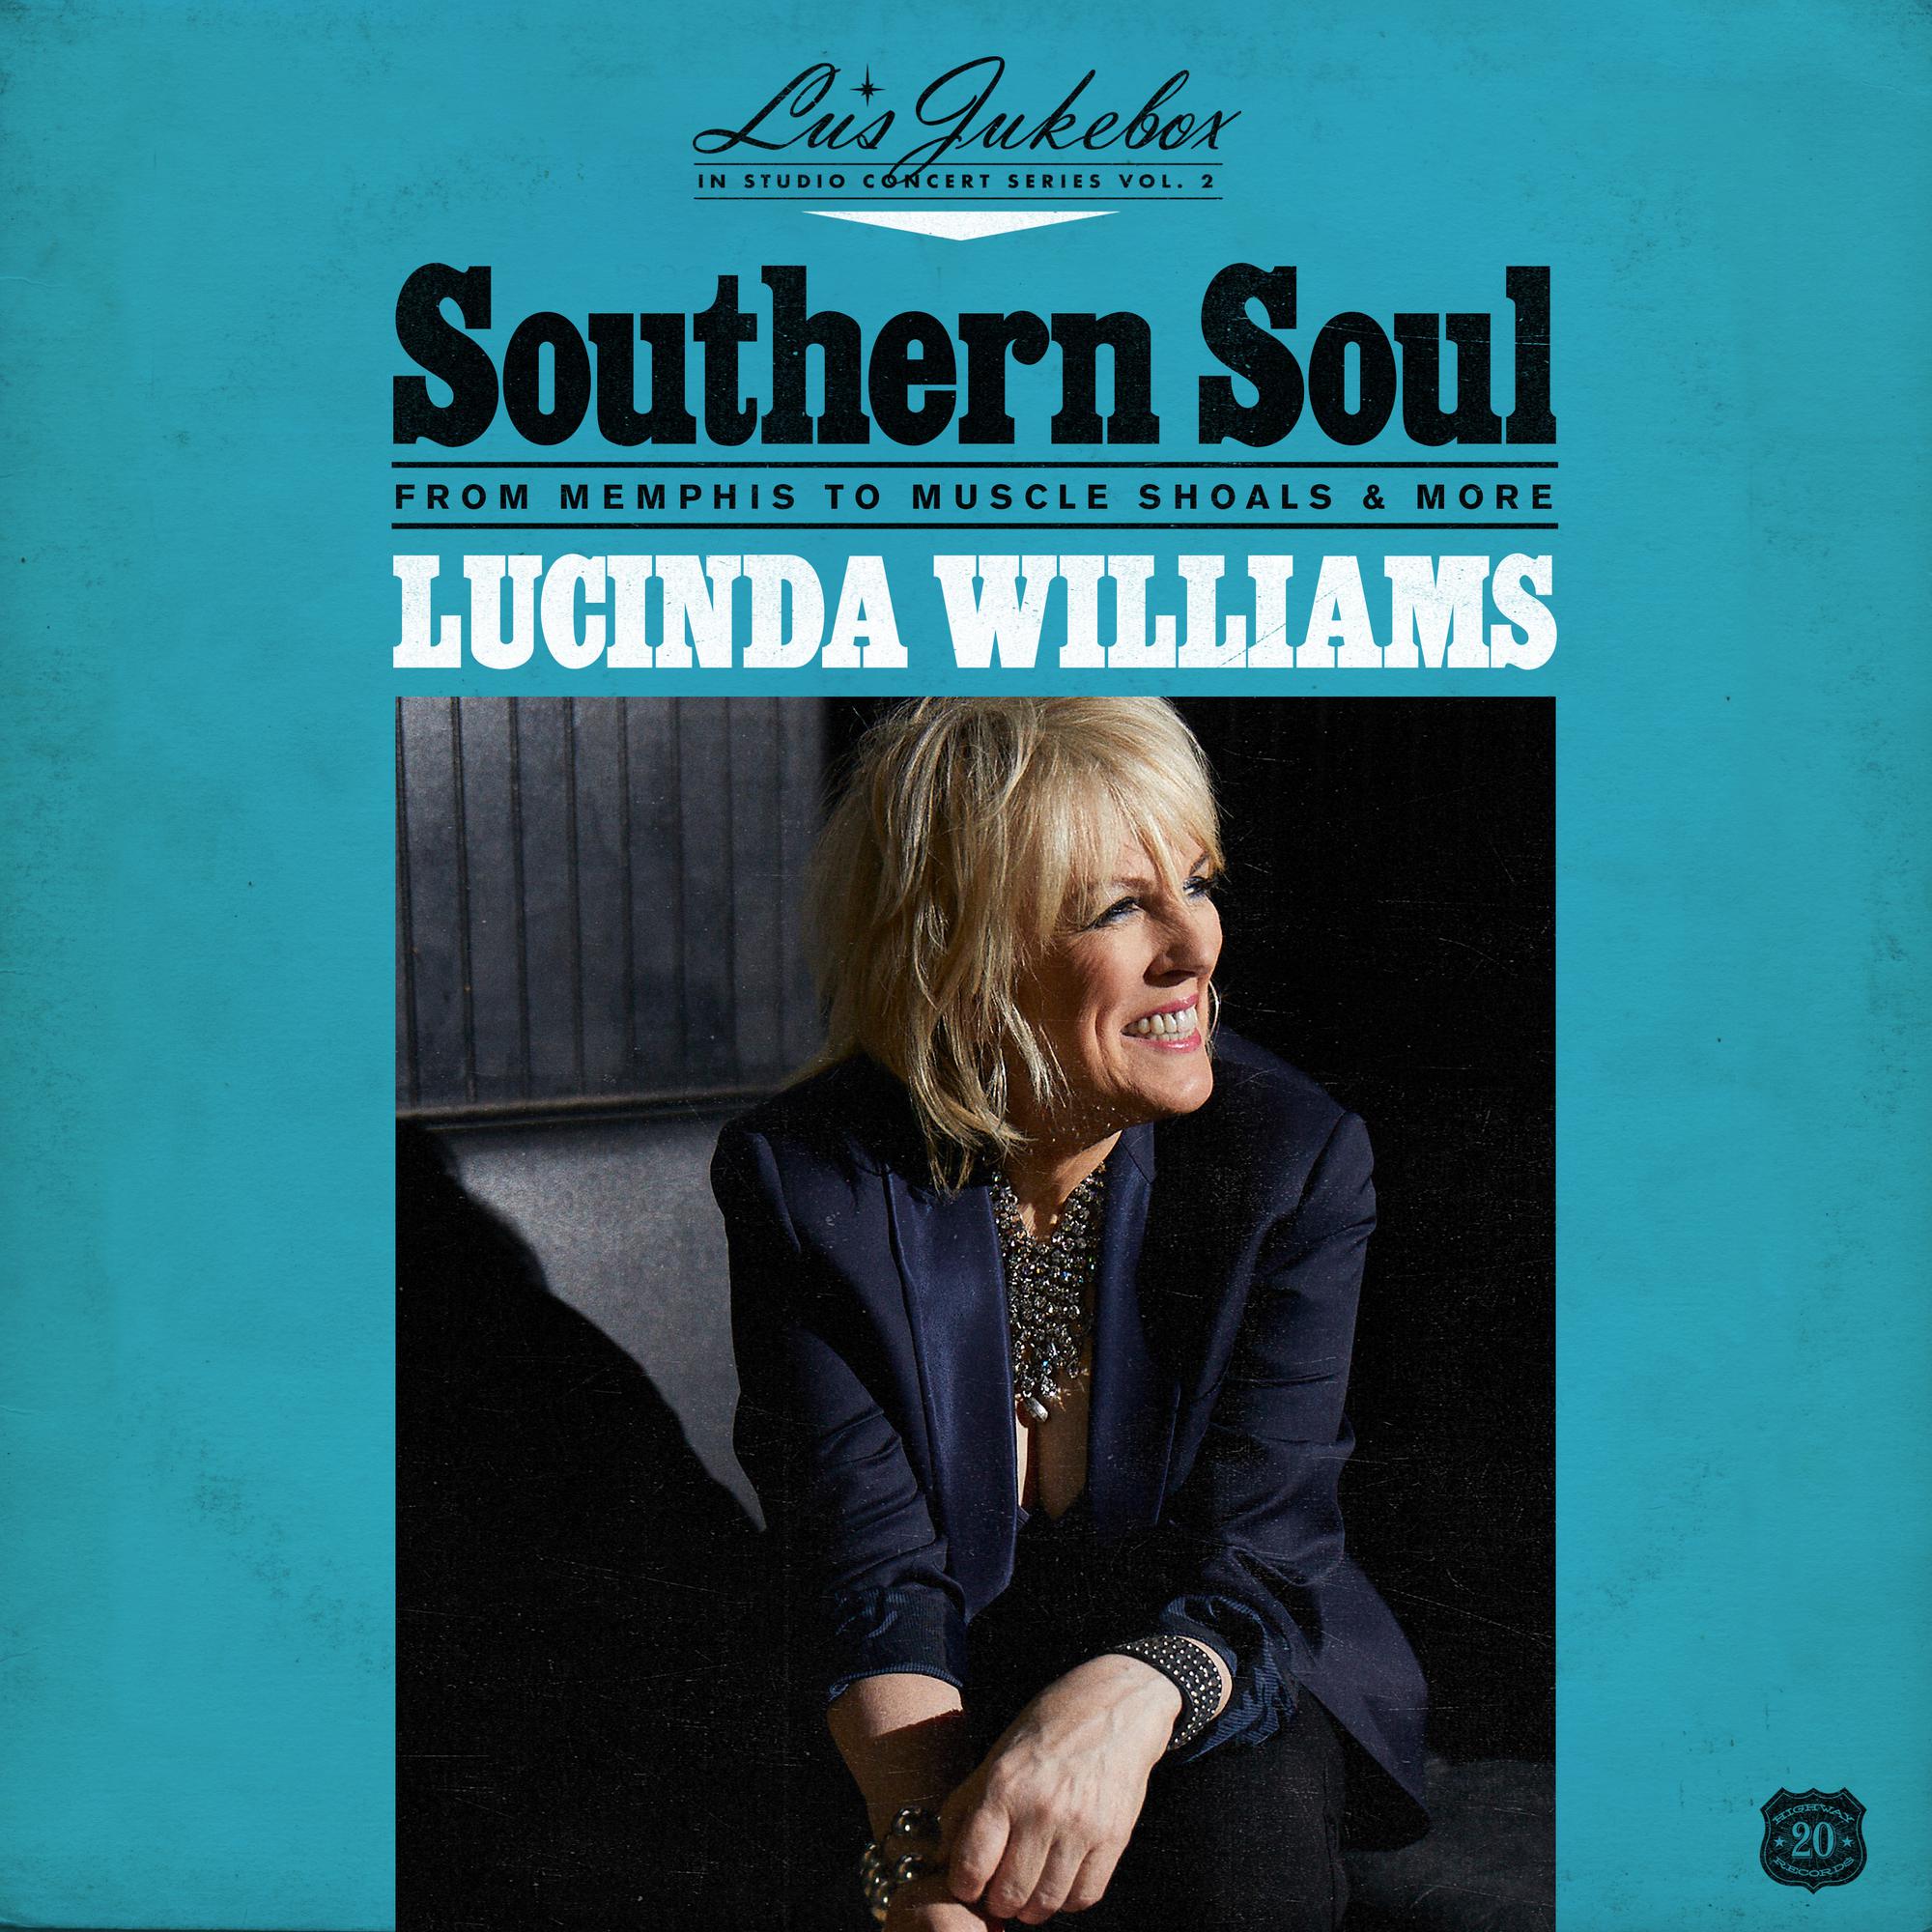 LUCINDA WILLIAMS - Lu's Jukebox Vol. 2: Southern Soul: From Memphis To Muscle Shoals - CD